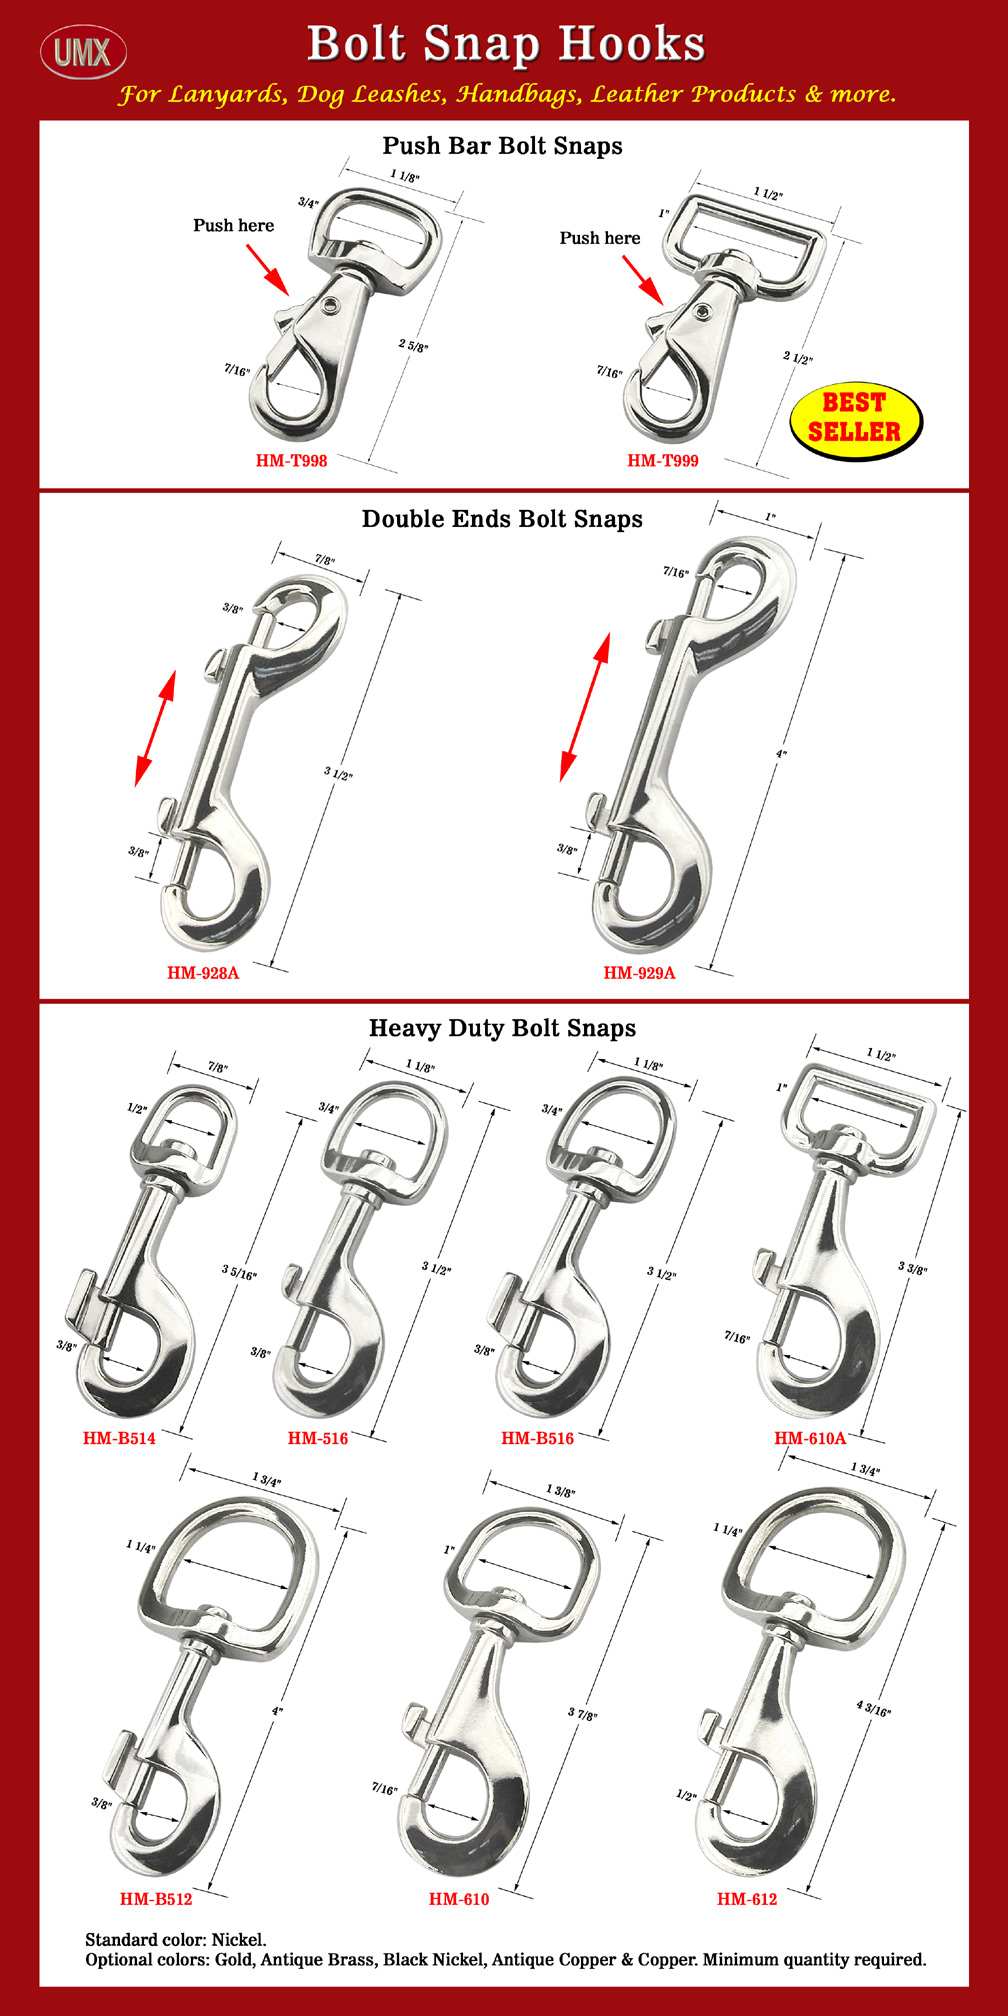 Overall View: Helpful Photo For 1/2" Heavy Duty Big Slide Knob Bolt Snap Hooks: For Round Rope Buyer